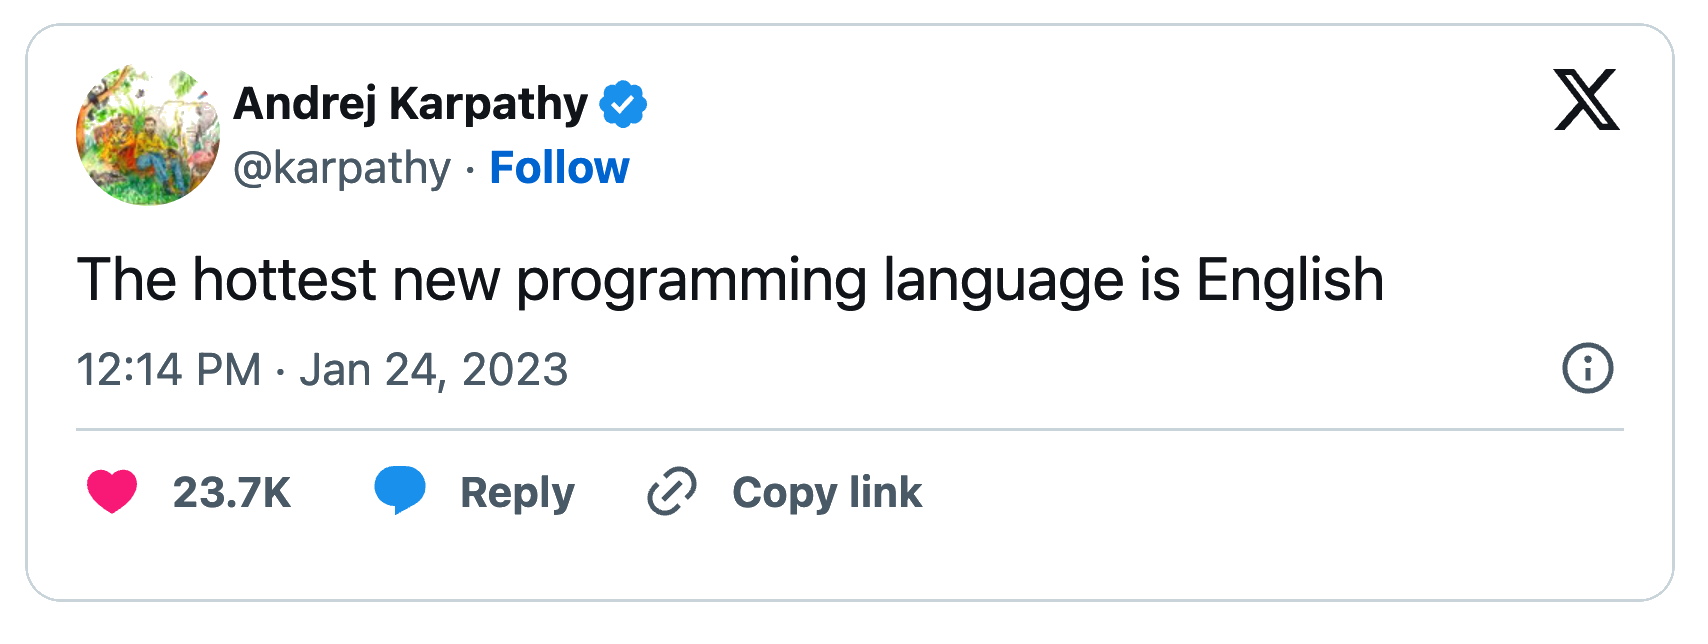 The hottest new programming language is English - Tweet by Andrej Karpathy